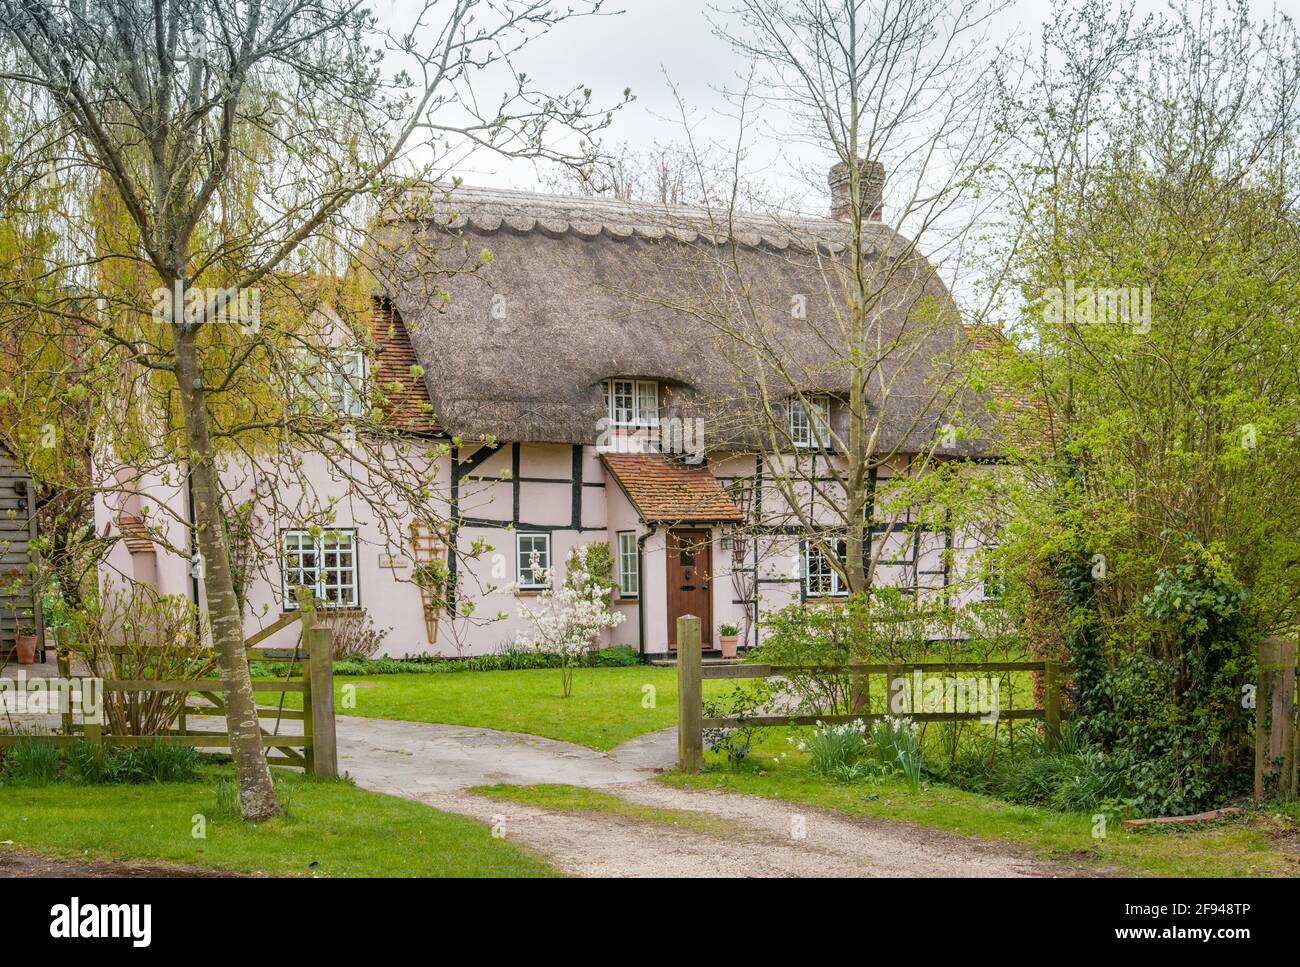 'Cape Cottage' - Cottages in the village of Sydenham, Oxfordshire, England. Stock Photo